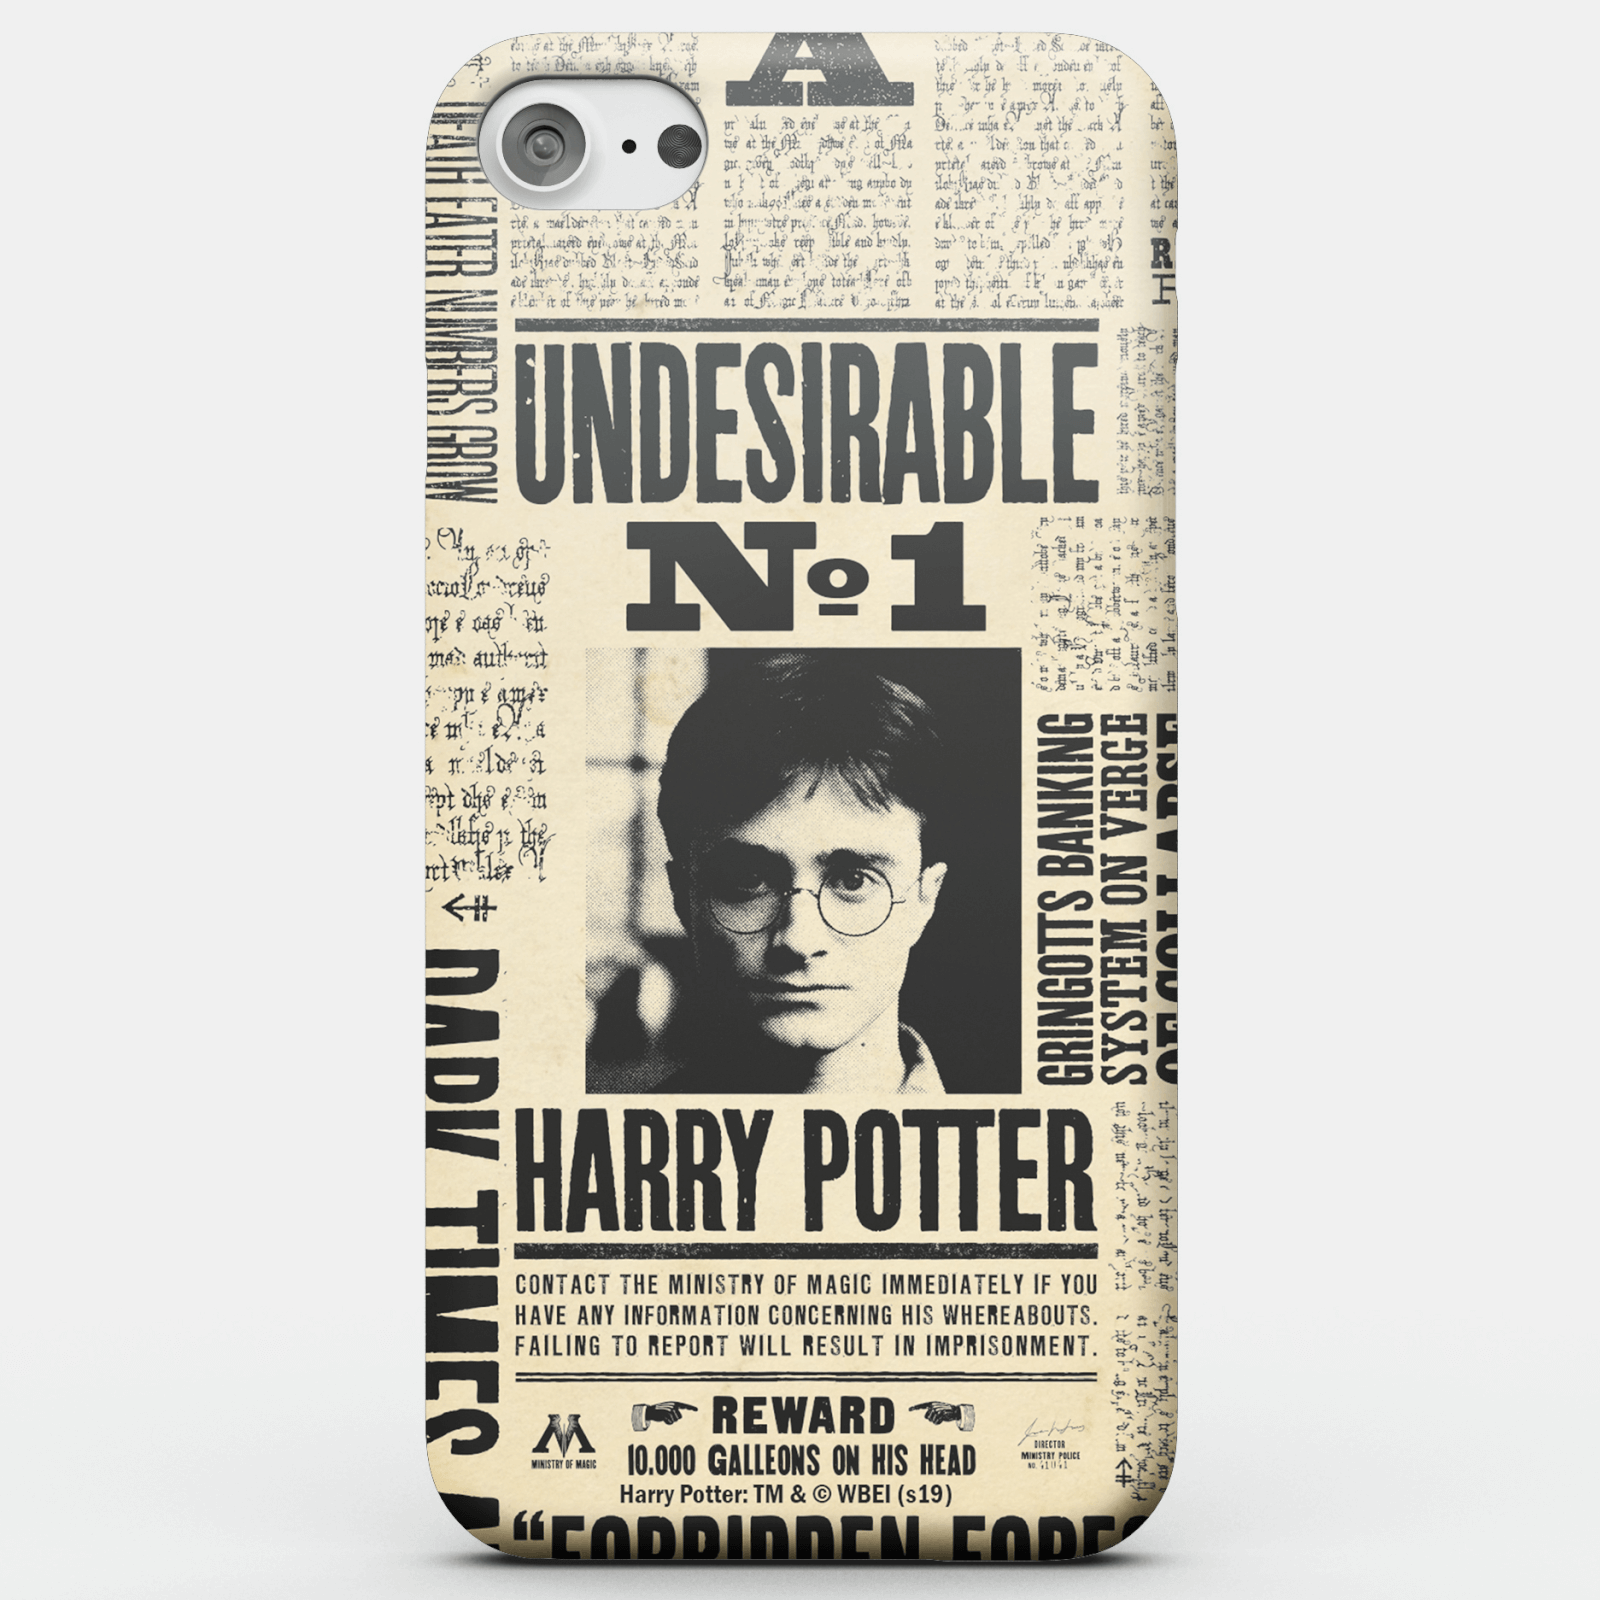 Harry Potter Phonecases Undesirable No. 1 Smartphone Hülle für iPhone und Android - iPhone 5C - Tough Hülle Matt